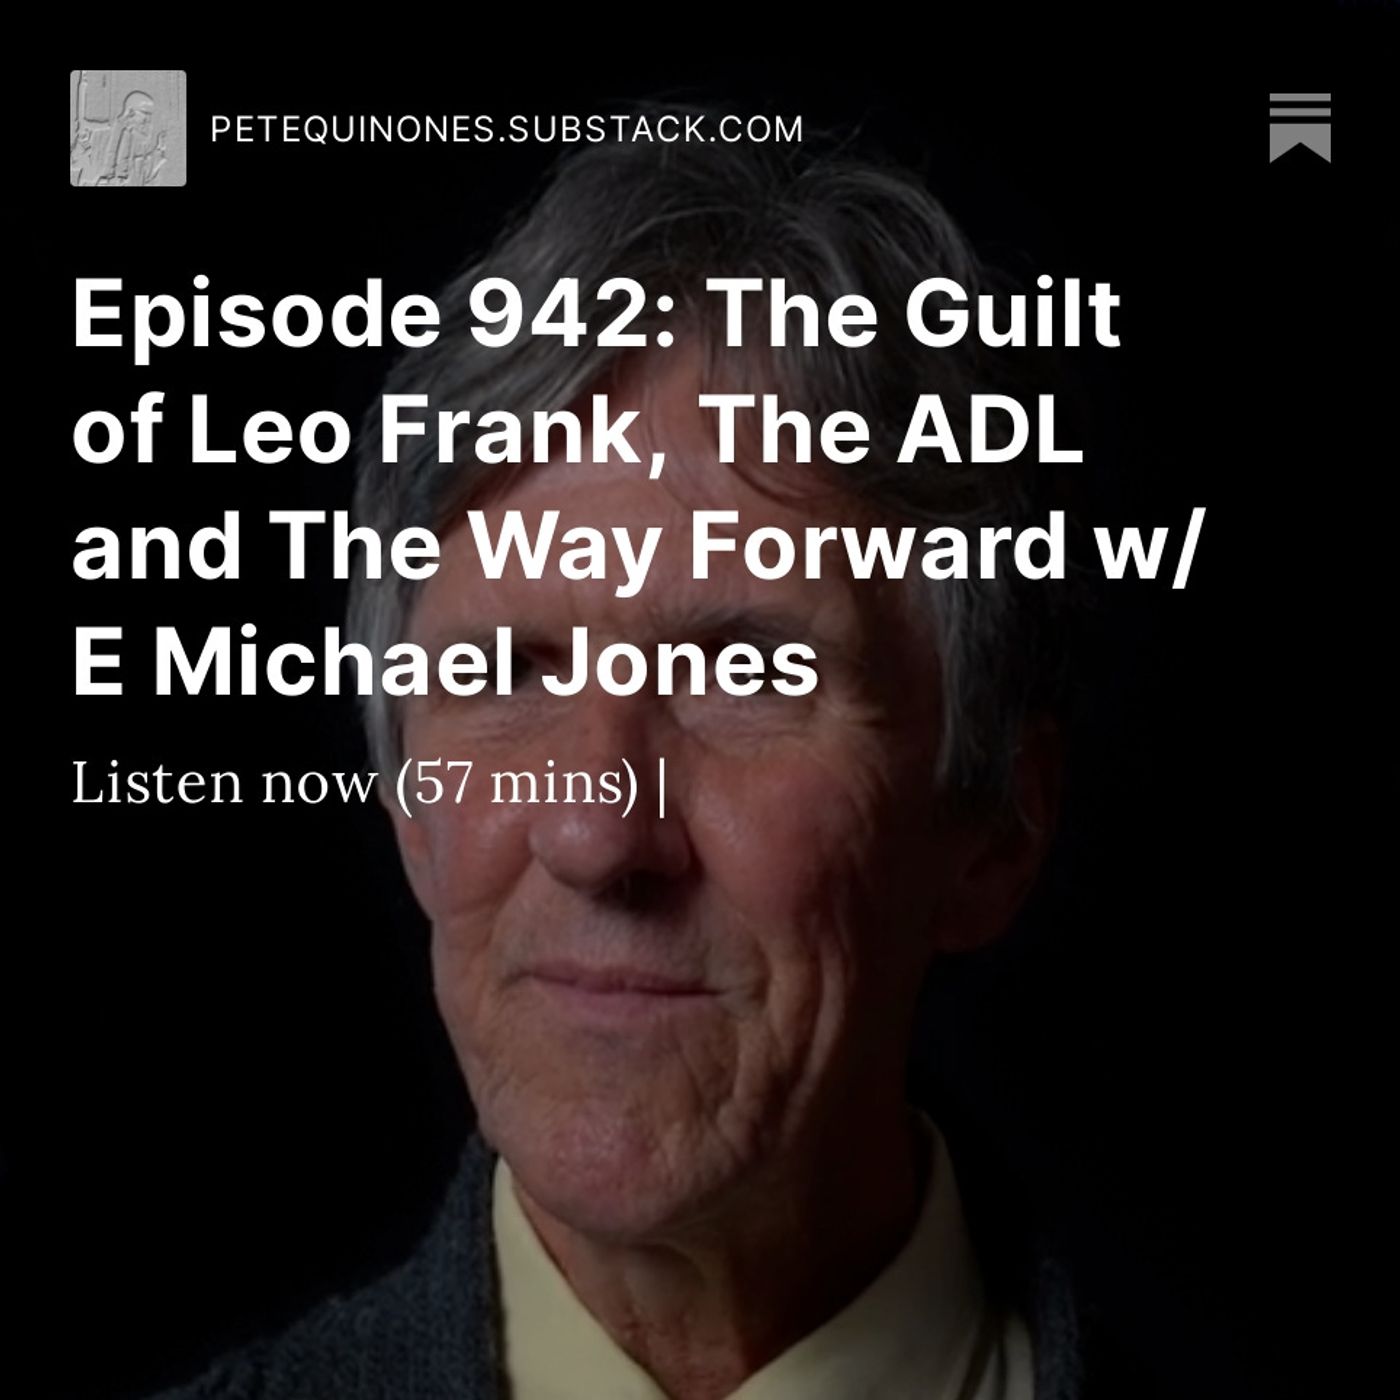 Episode 942: The Guilt of Leo Frank, The ADL and The Way Forward w/ E Michael Jones